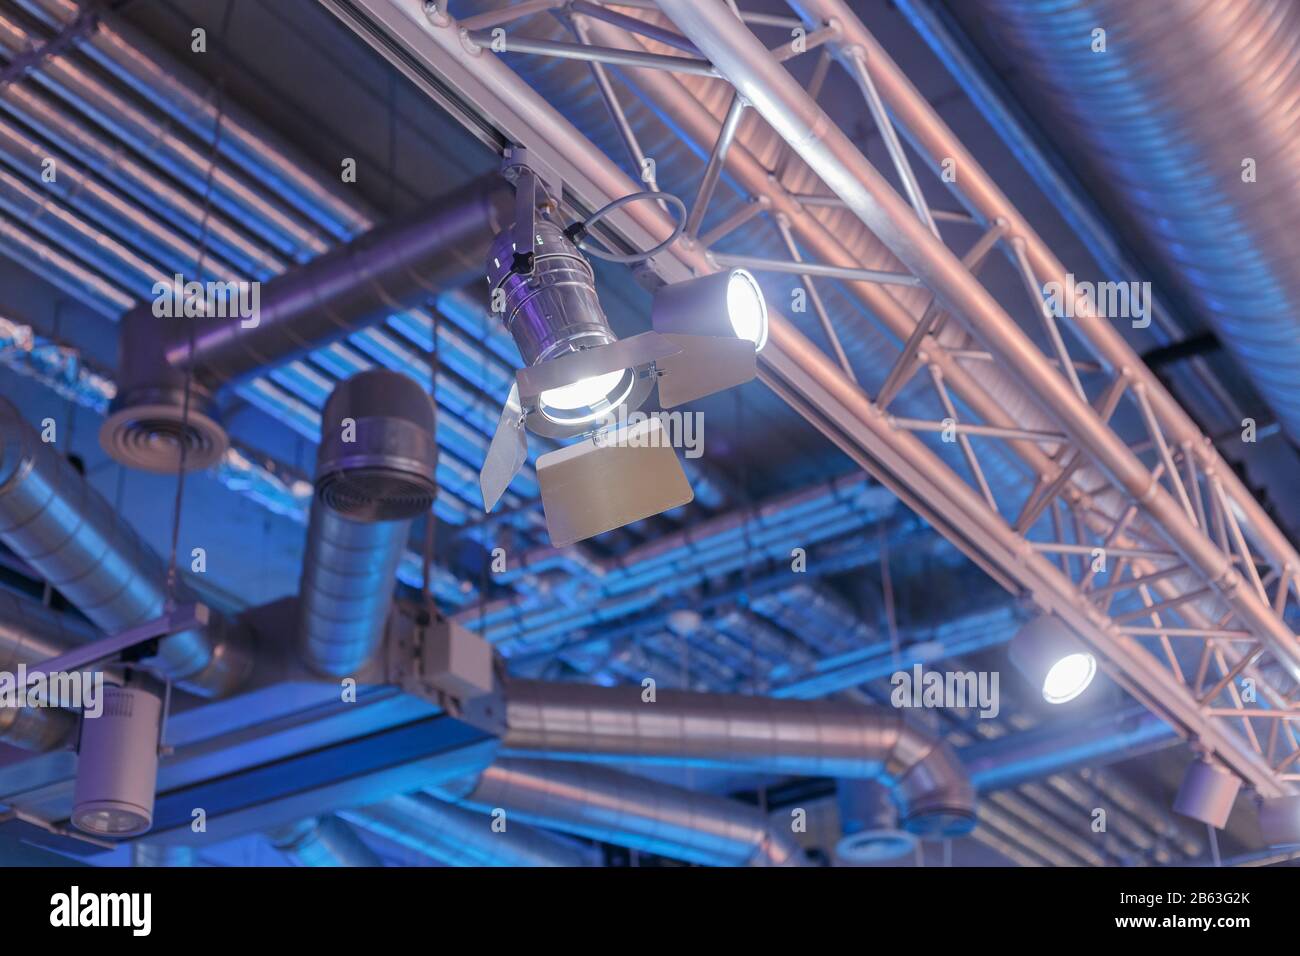 Industrial lighting system of modern building Stock Photo